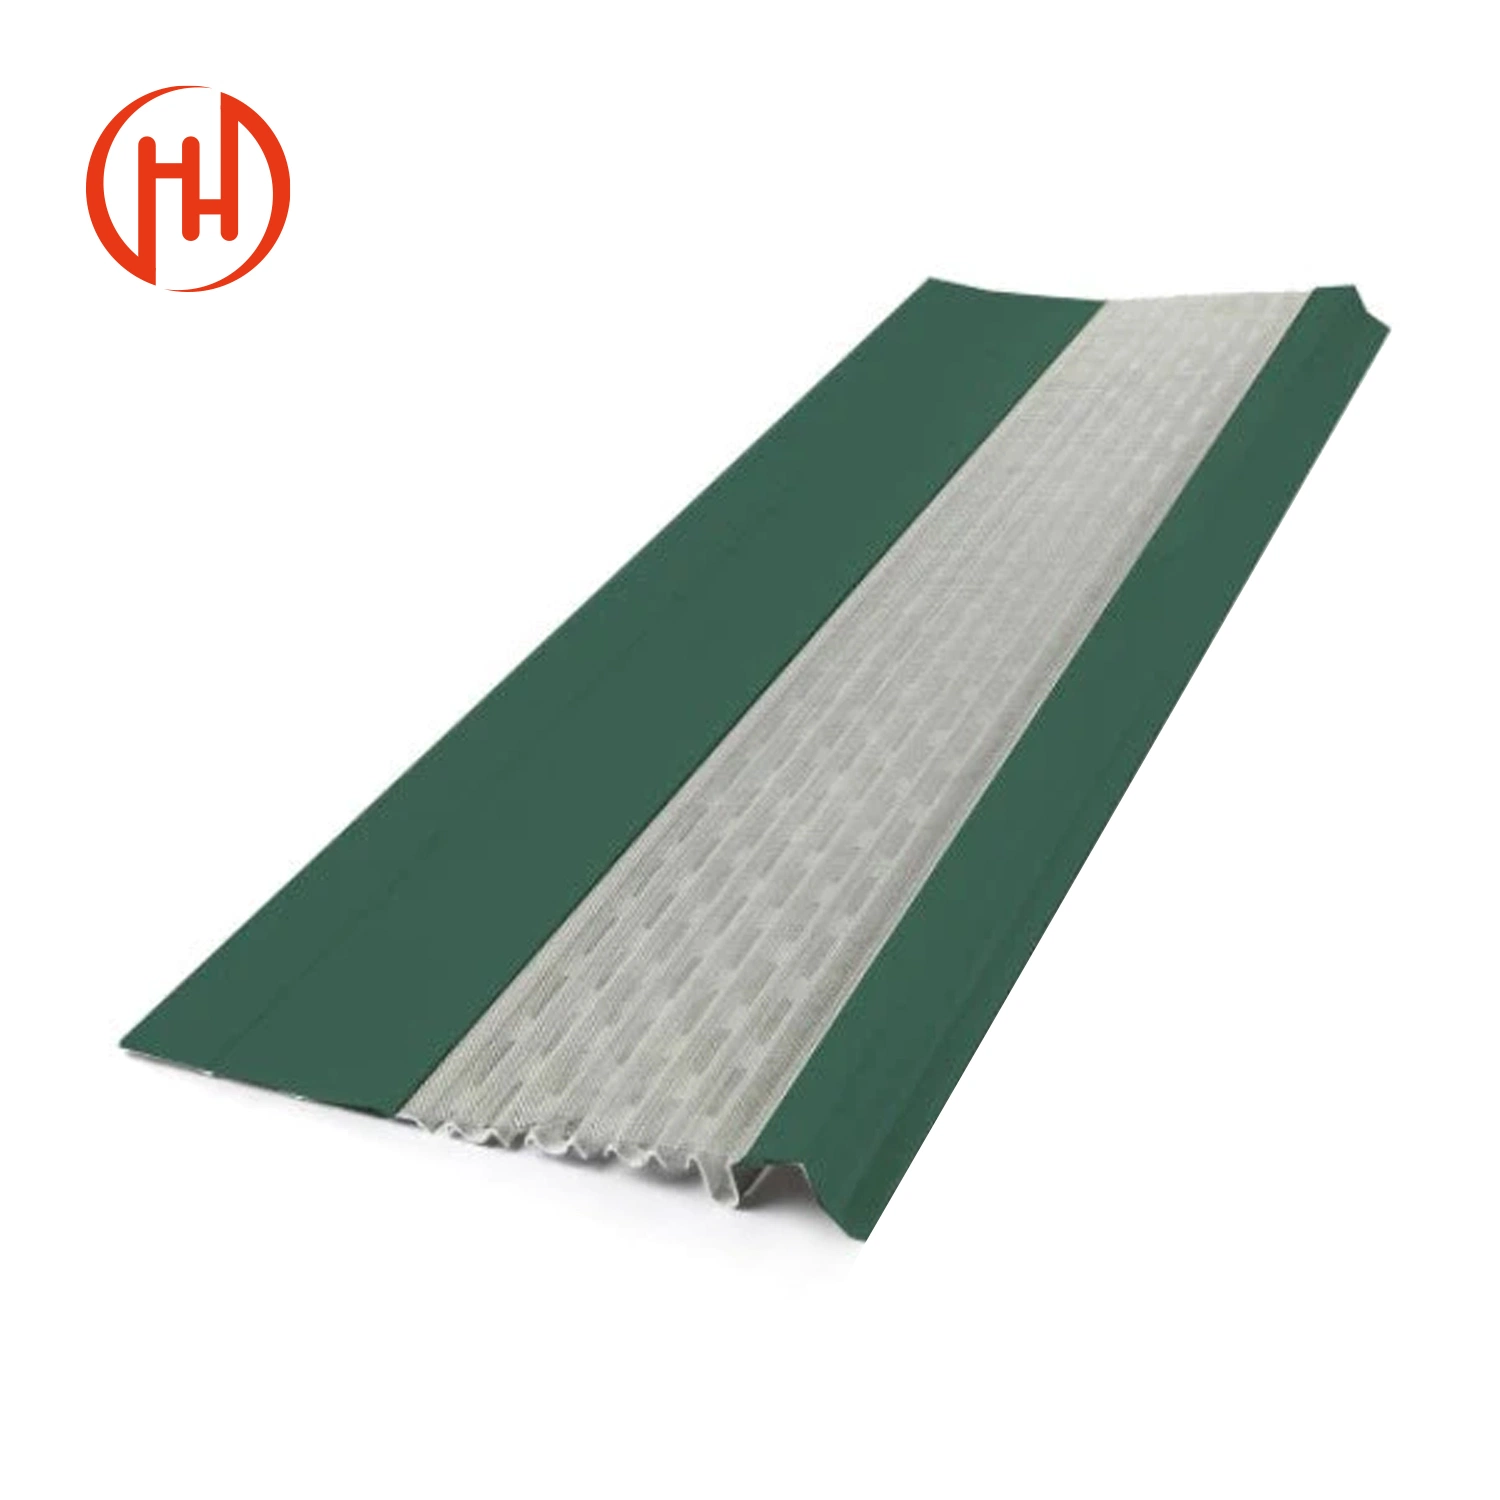 Large Industrial Pluvial Roof House Gutter Guard